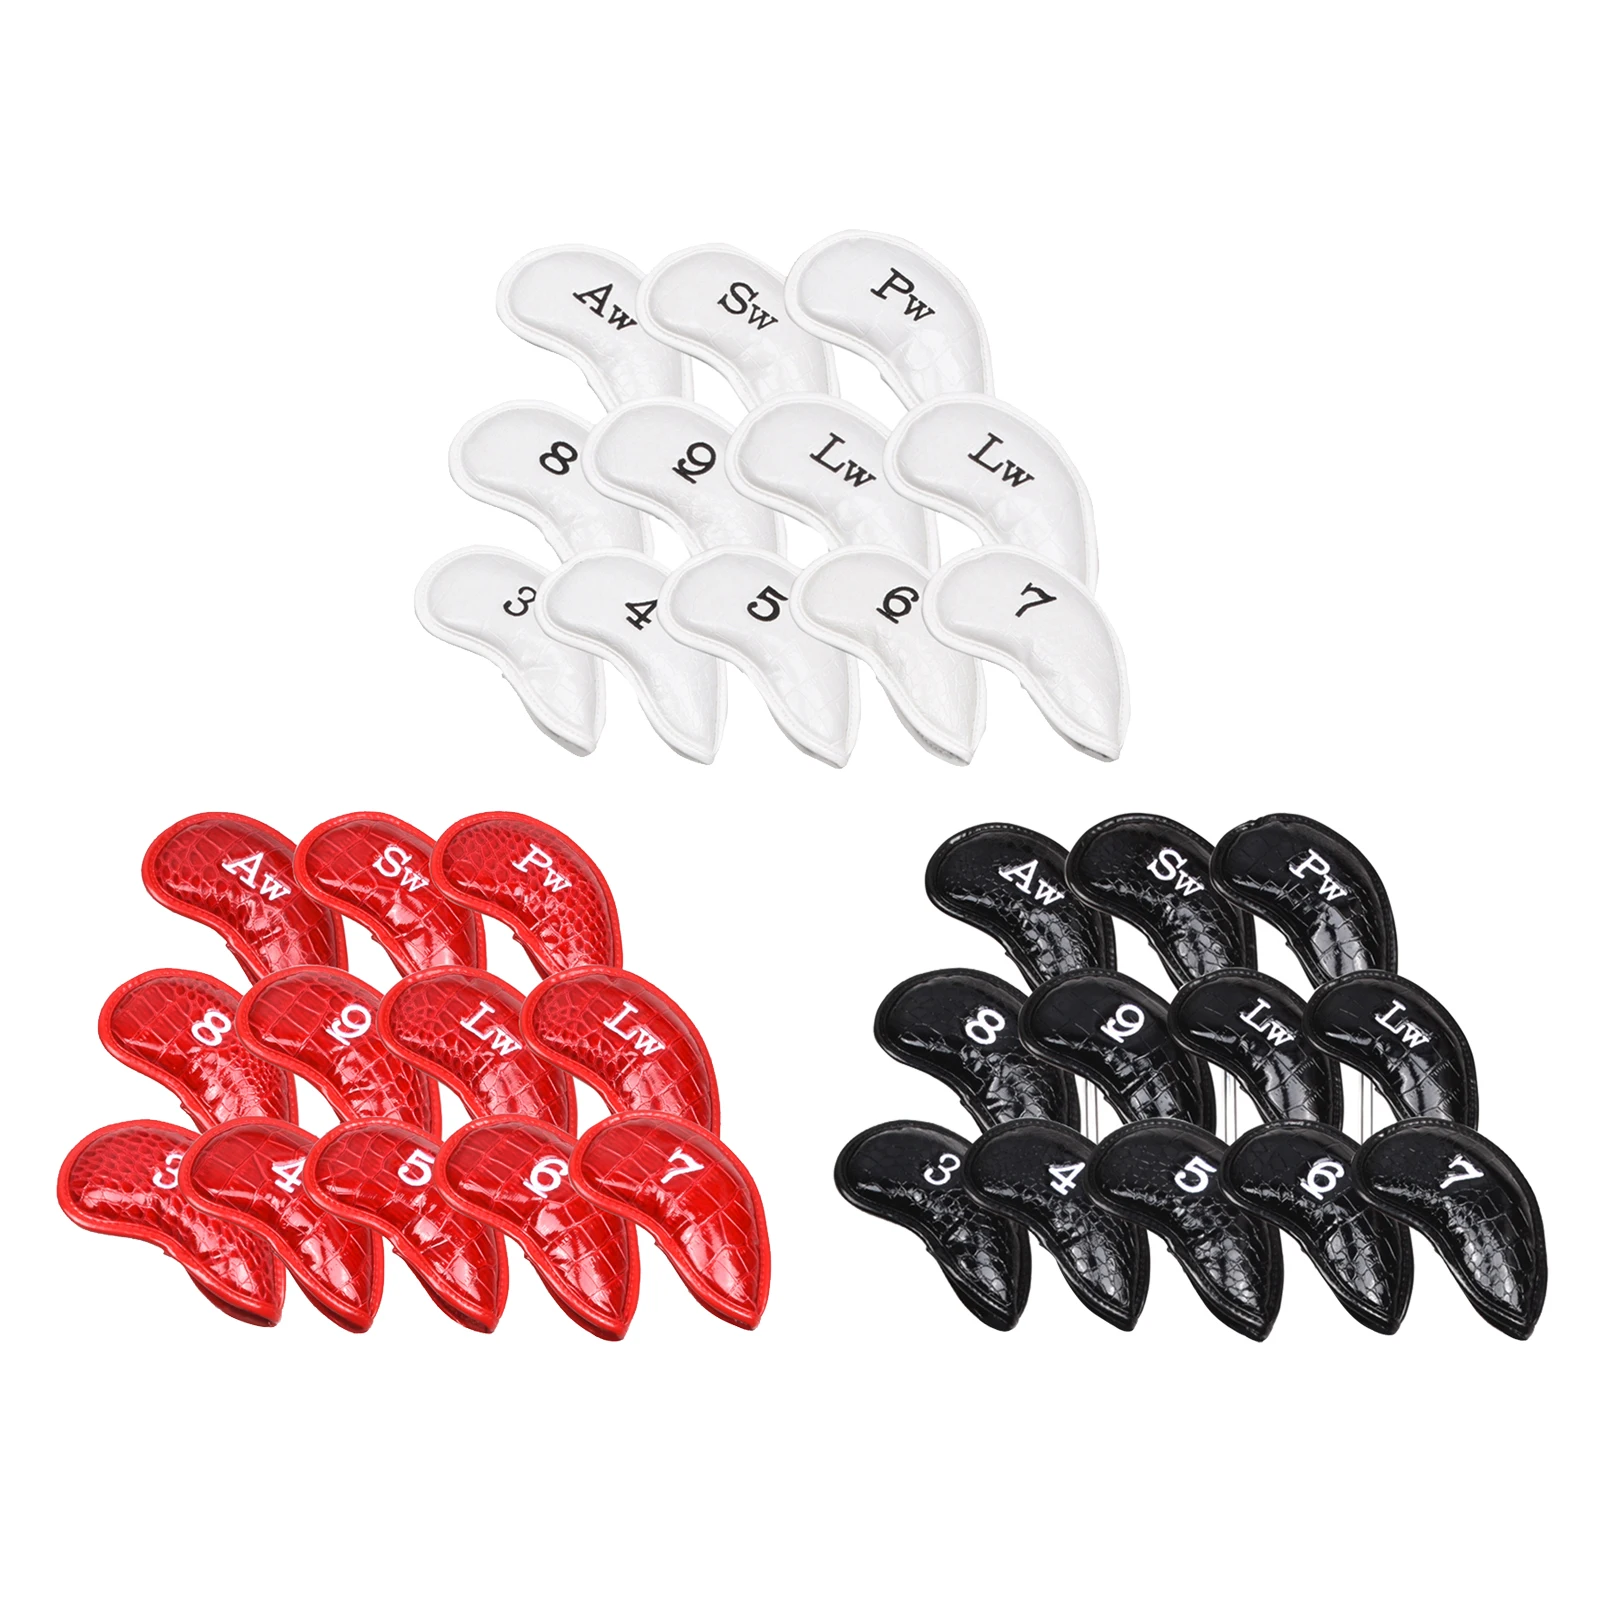 

12pcs Premium Golf Iron Headcover Waterproof PU Eco Friendly Head Cover Adult Golfer Protect Anti-Scratching Wrap Guard Accs